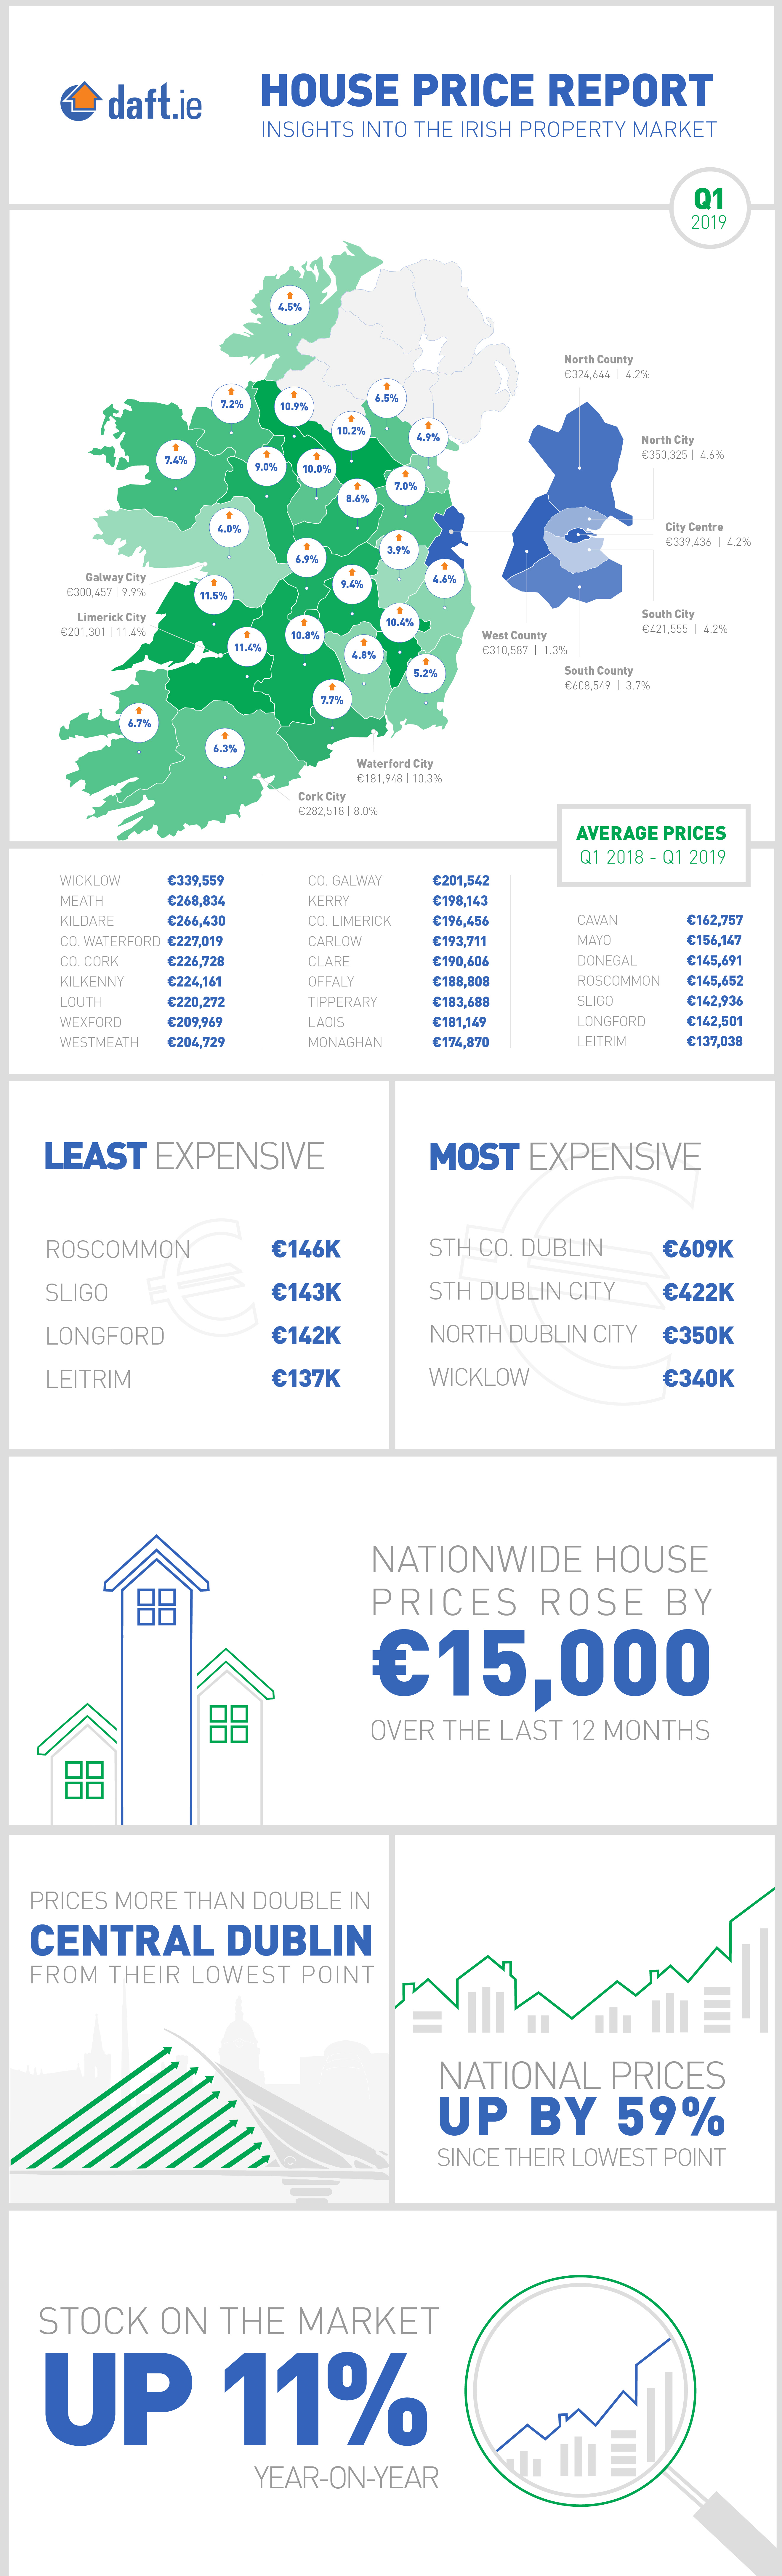 Daft.ie House Price Report: Q1 2019 Infographic